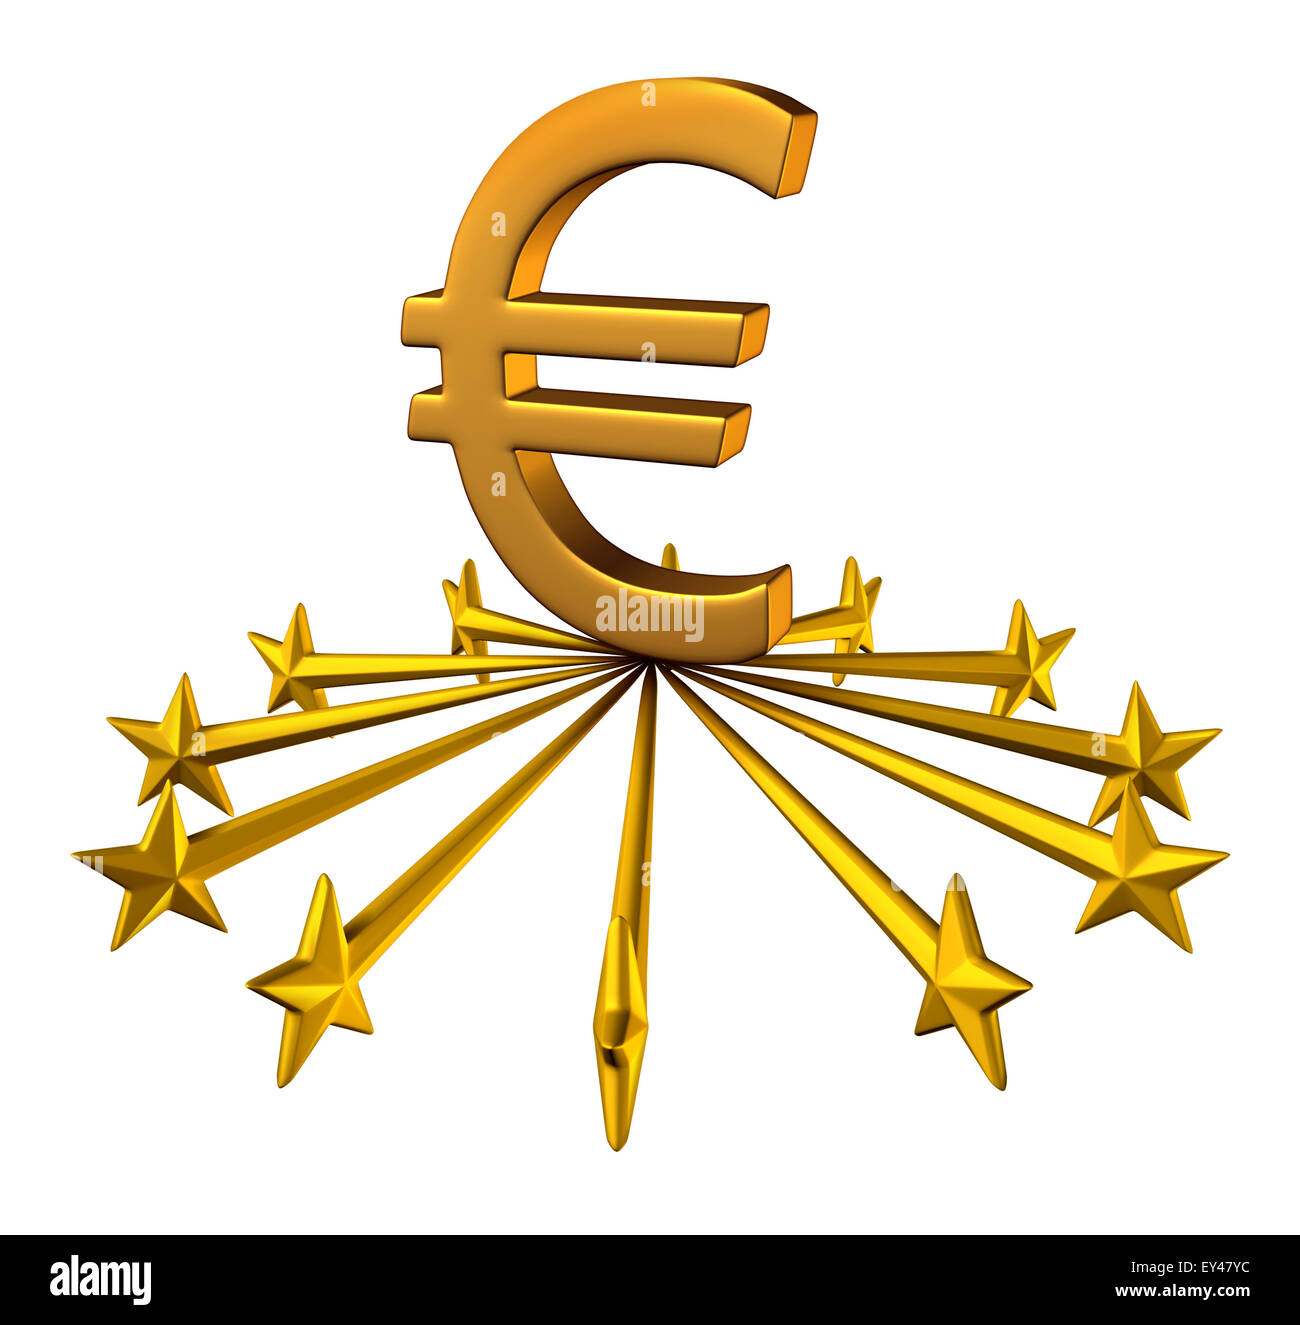 Euro currency support financial business concept as stars from the European union partnership reaching out to lift up the three Stock Photo